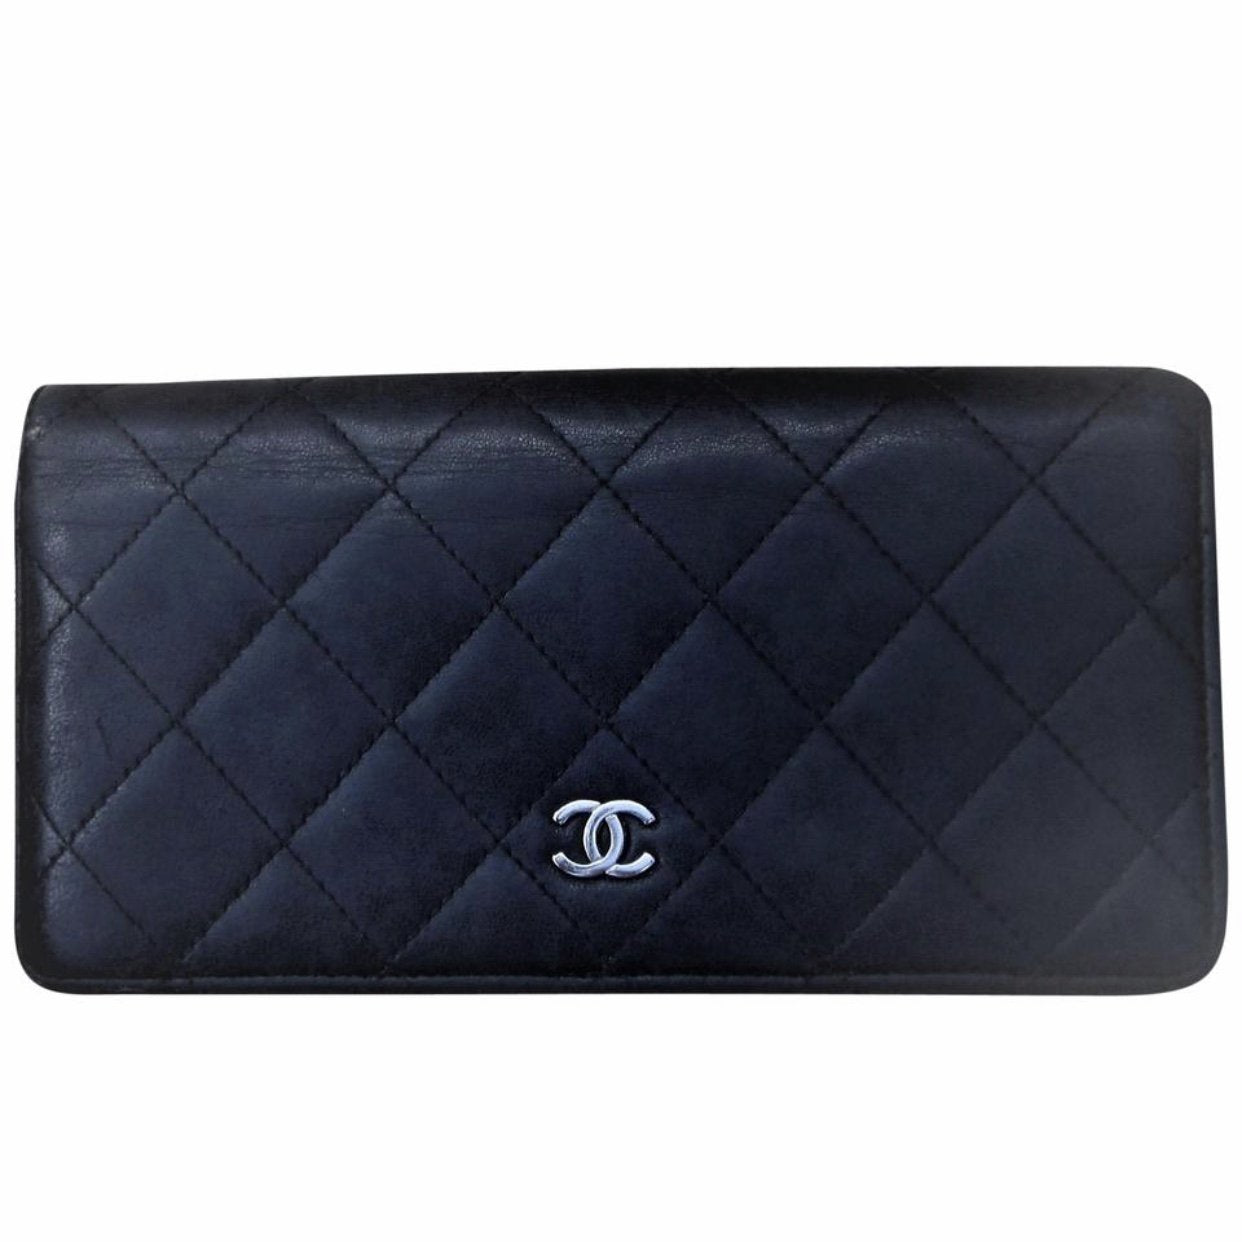 CHANEL Black Leather Long Quilted Classic Flap Wallet – Fashion